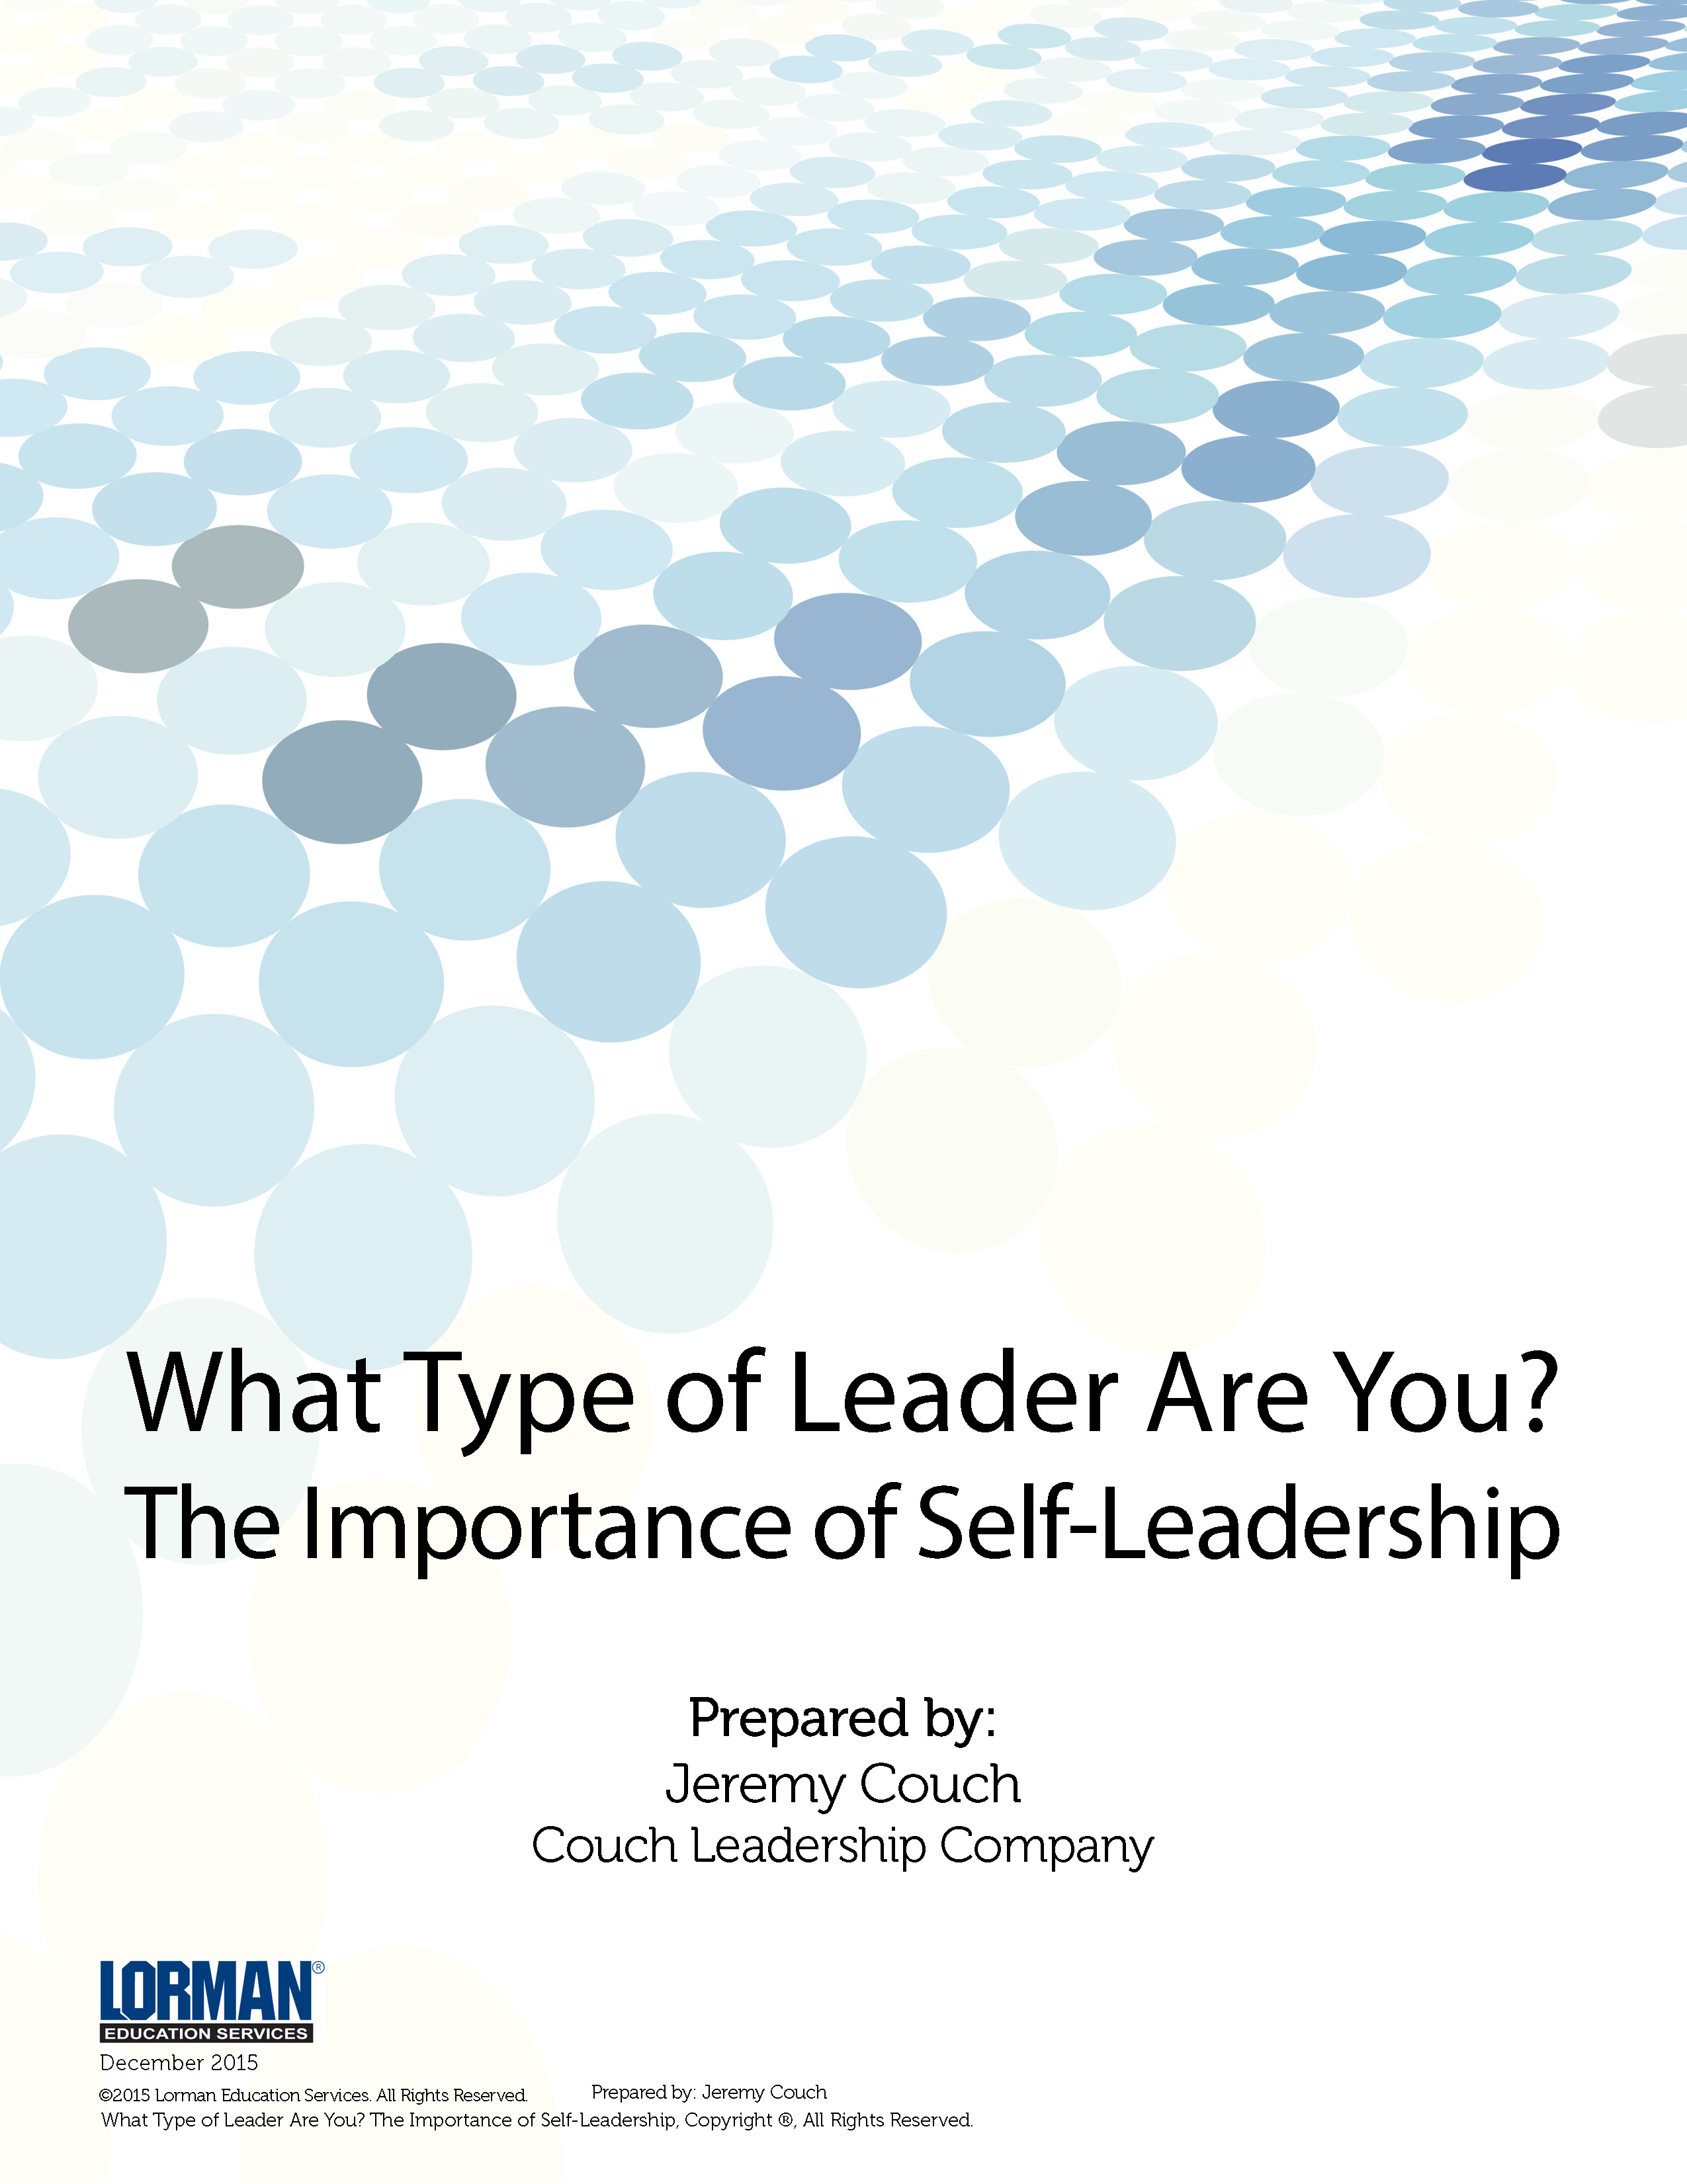 What Type of Leader Are You - The Importance of Self-Leadership